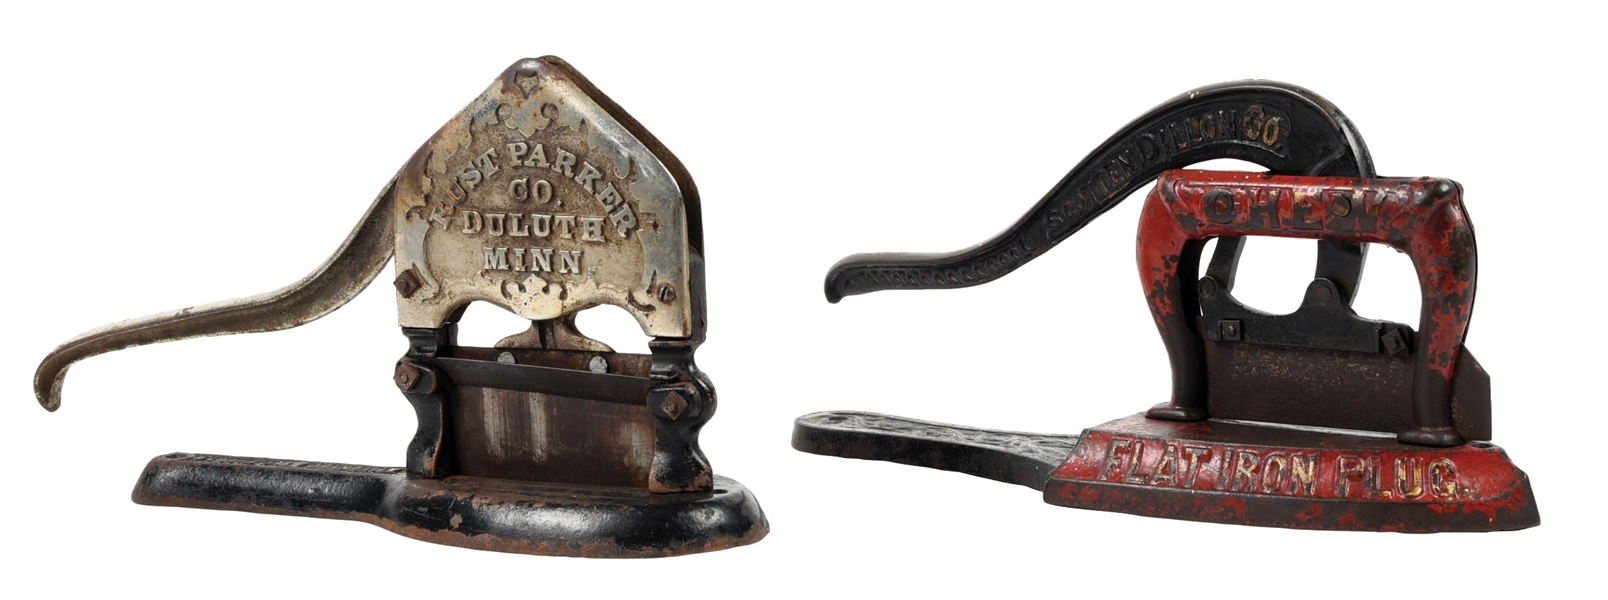 PAIR OF CAST IRON TOBACCO CUTTERS